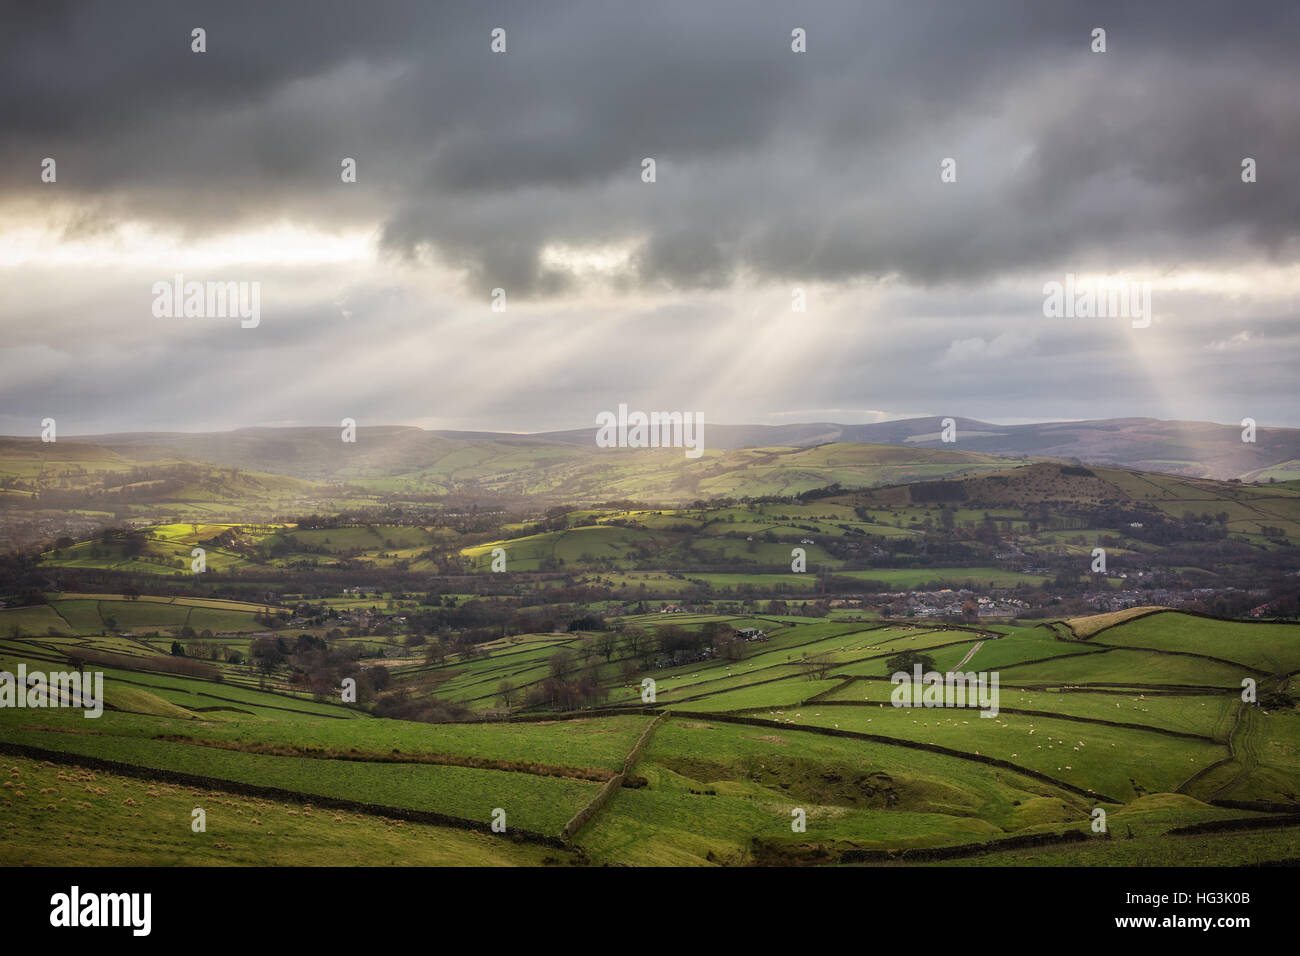 Rays of sunlight breaking through heavy clouds over rolling, green hills in the High Peak District, Derbyshire, England. Stock Photo